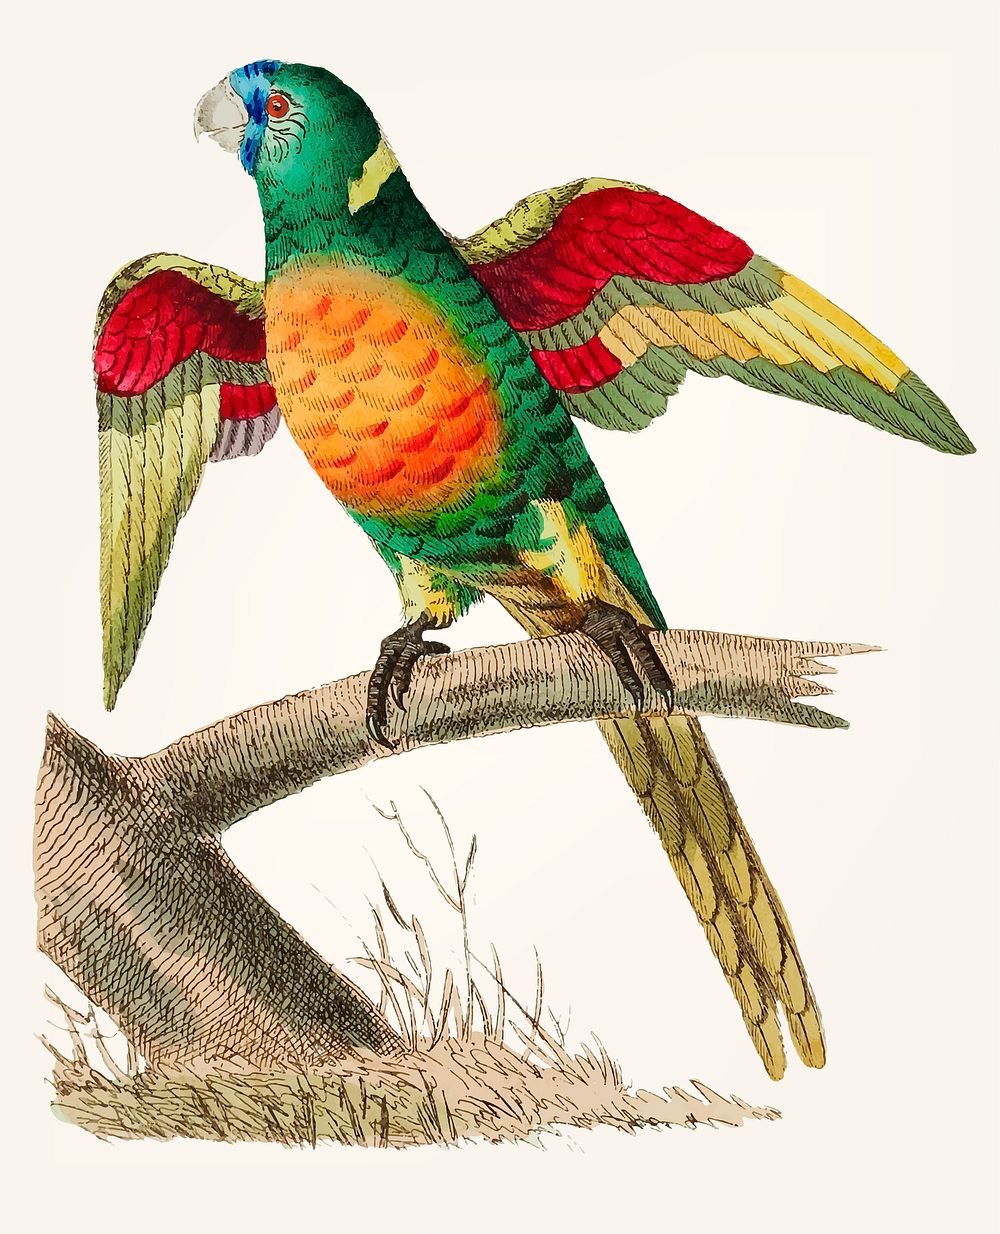 Vintage illustration of long tailed green parrot